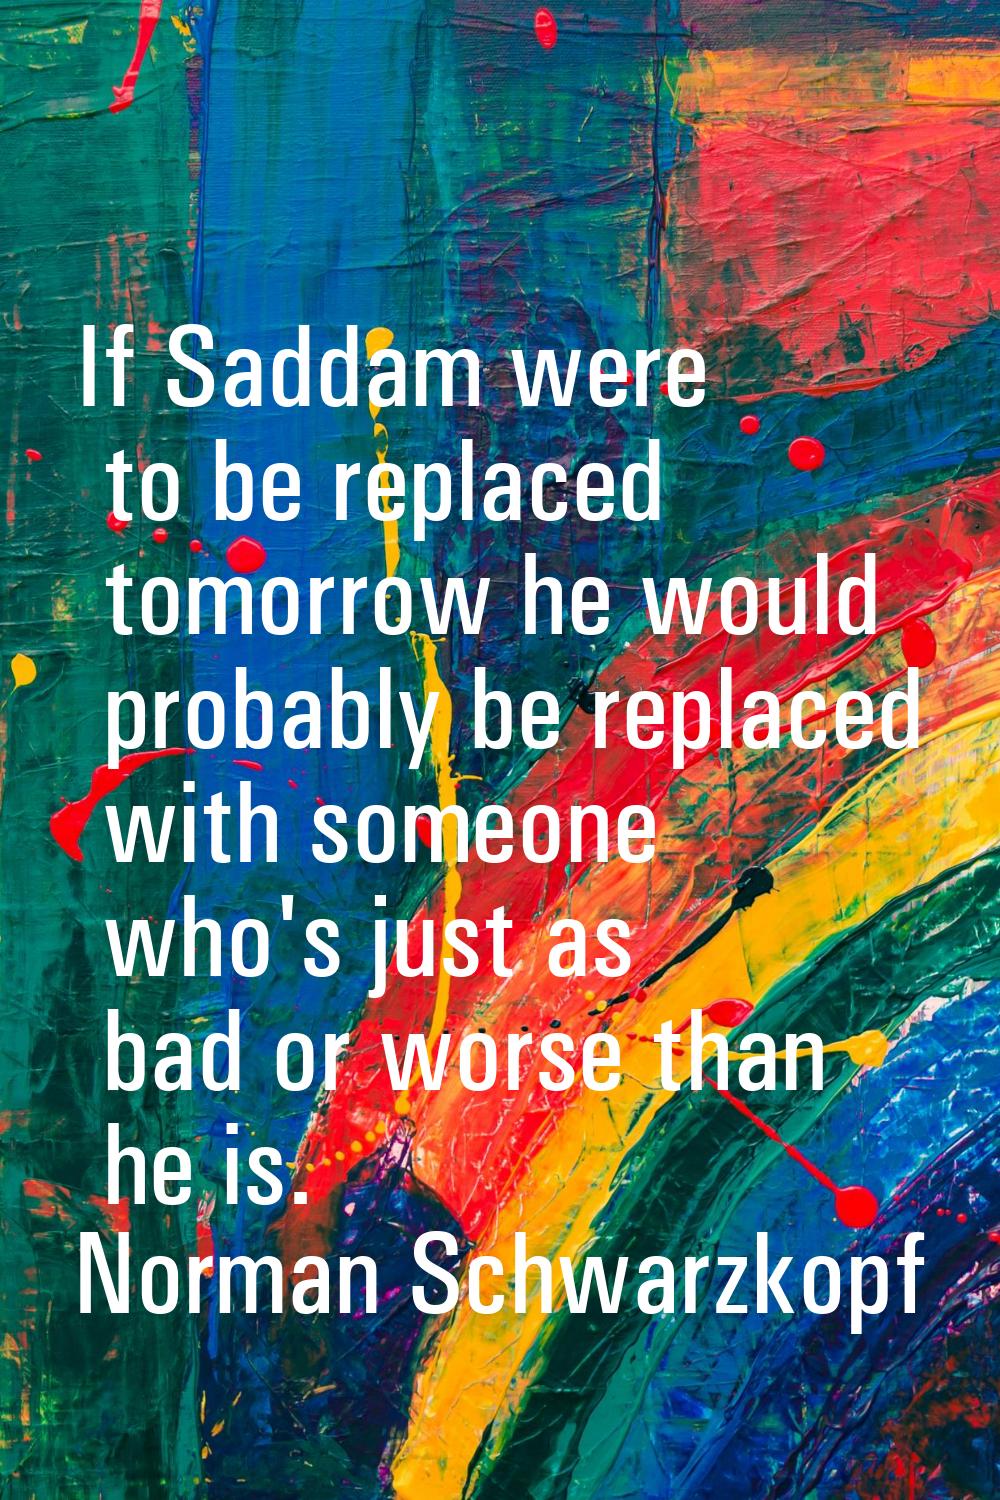 If Saddam were to be replaced tomorrow he would probably be replaced with someone who's just as bad